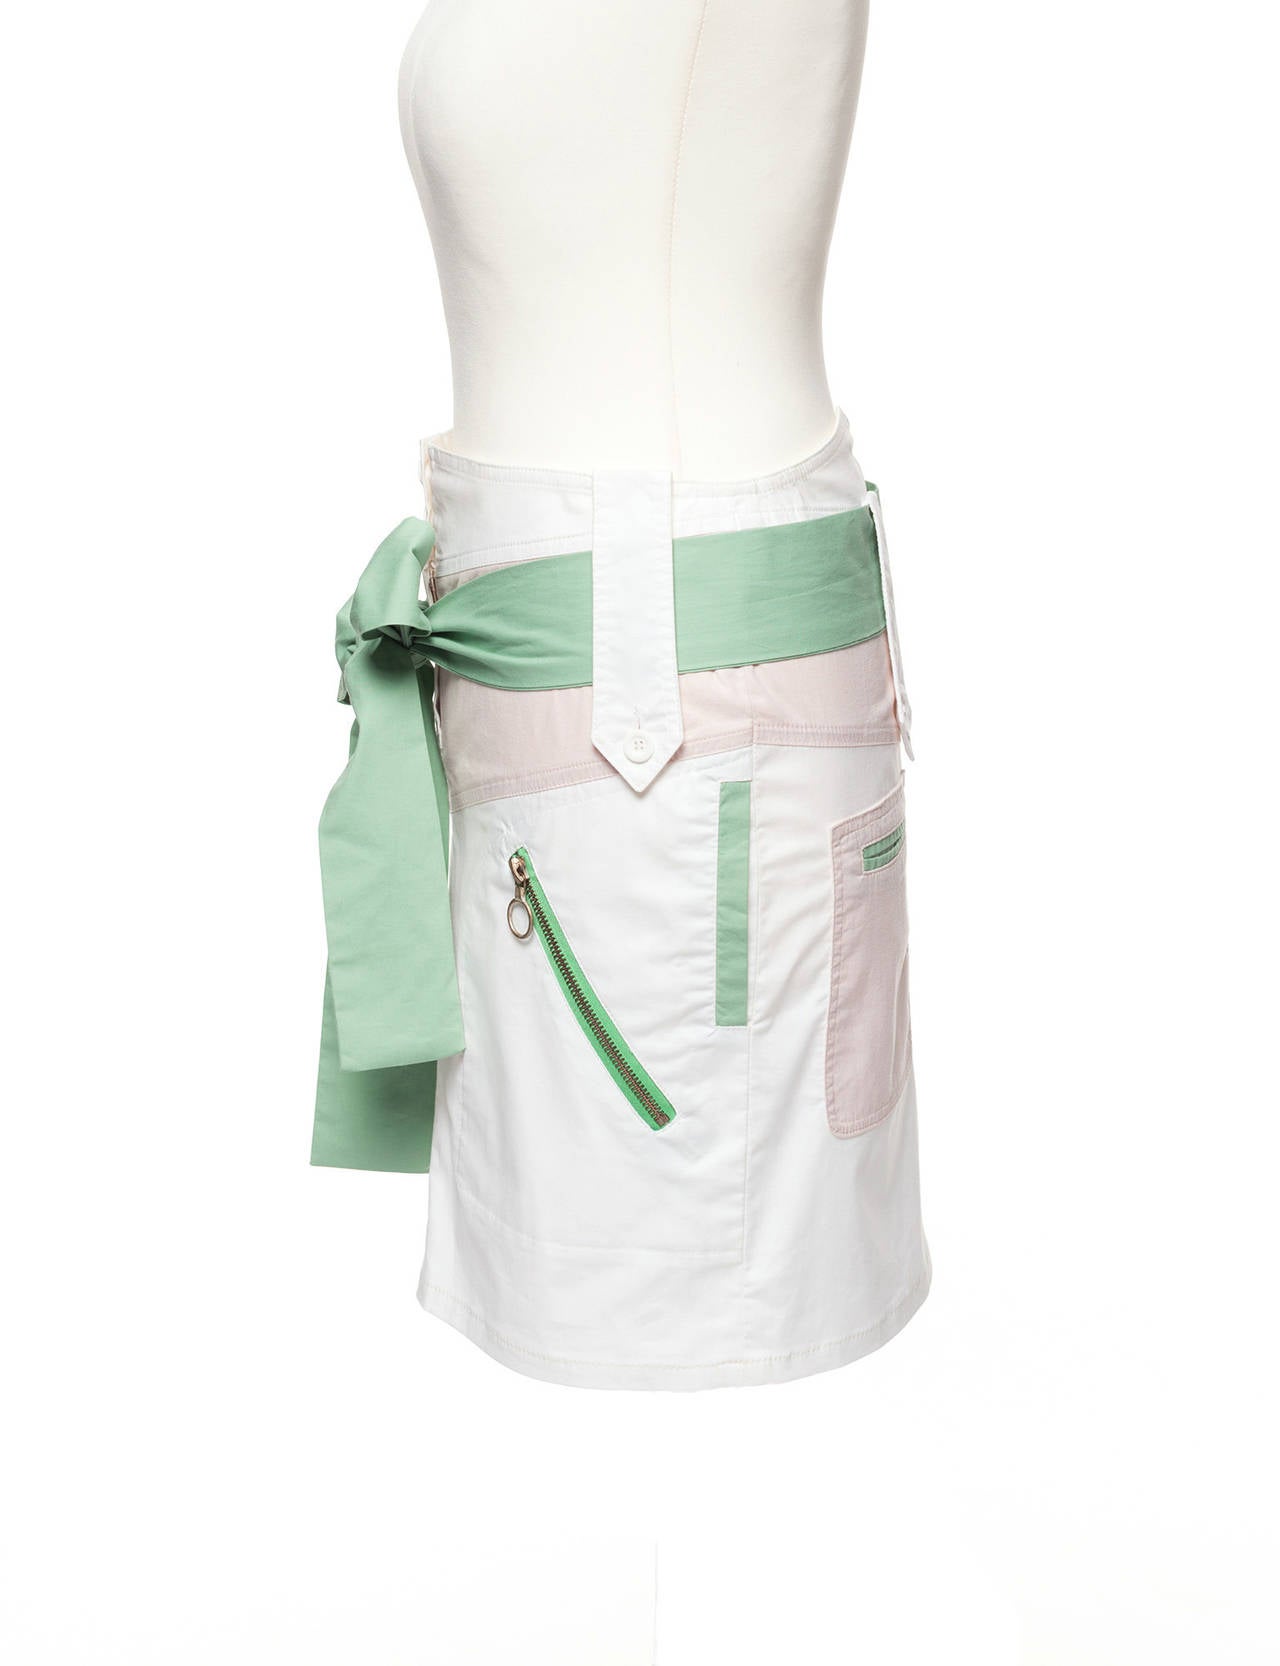 Chloe by Phoebe Philo Spring 2004 color blocked skirt, Sz. 8 In Excellent Condition For Sale In Berlin, DE